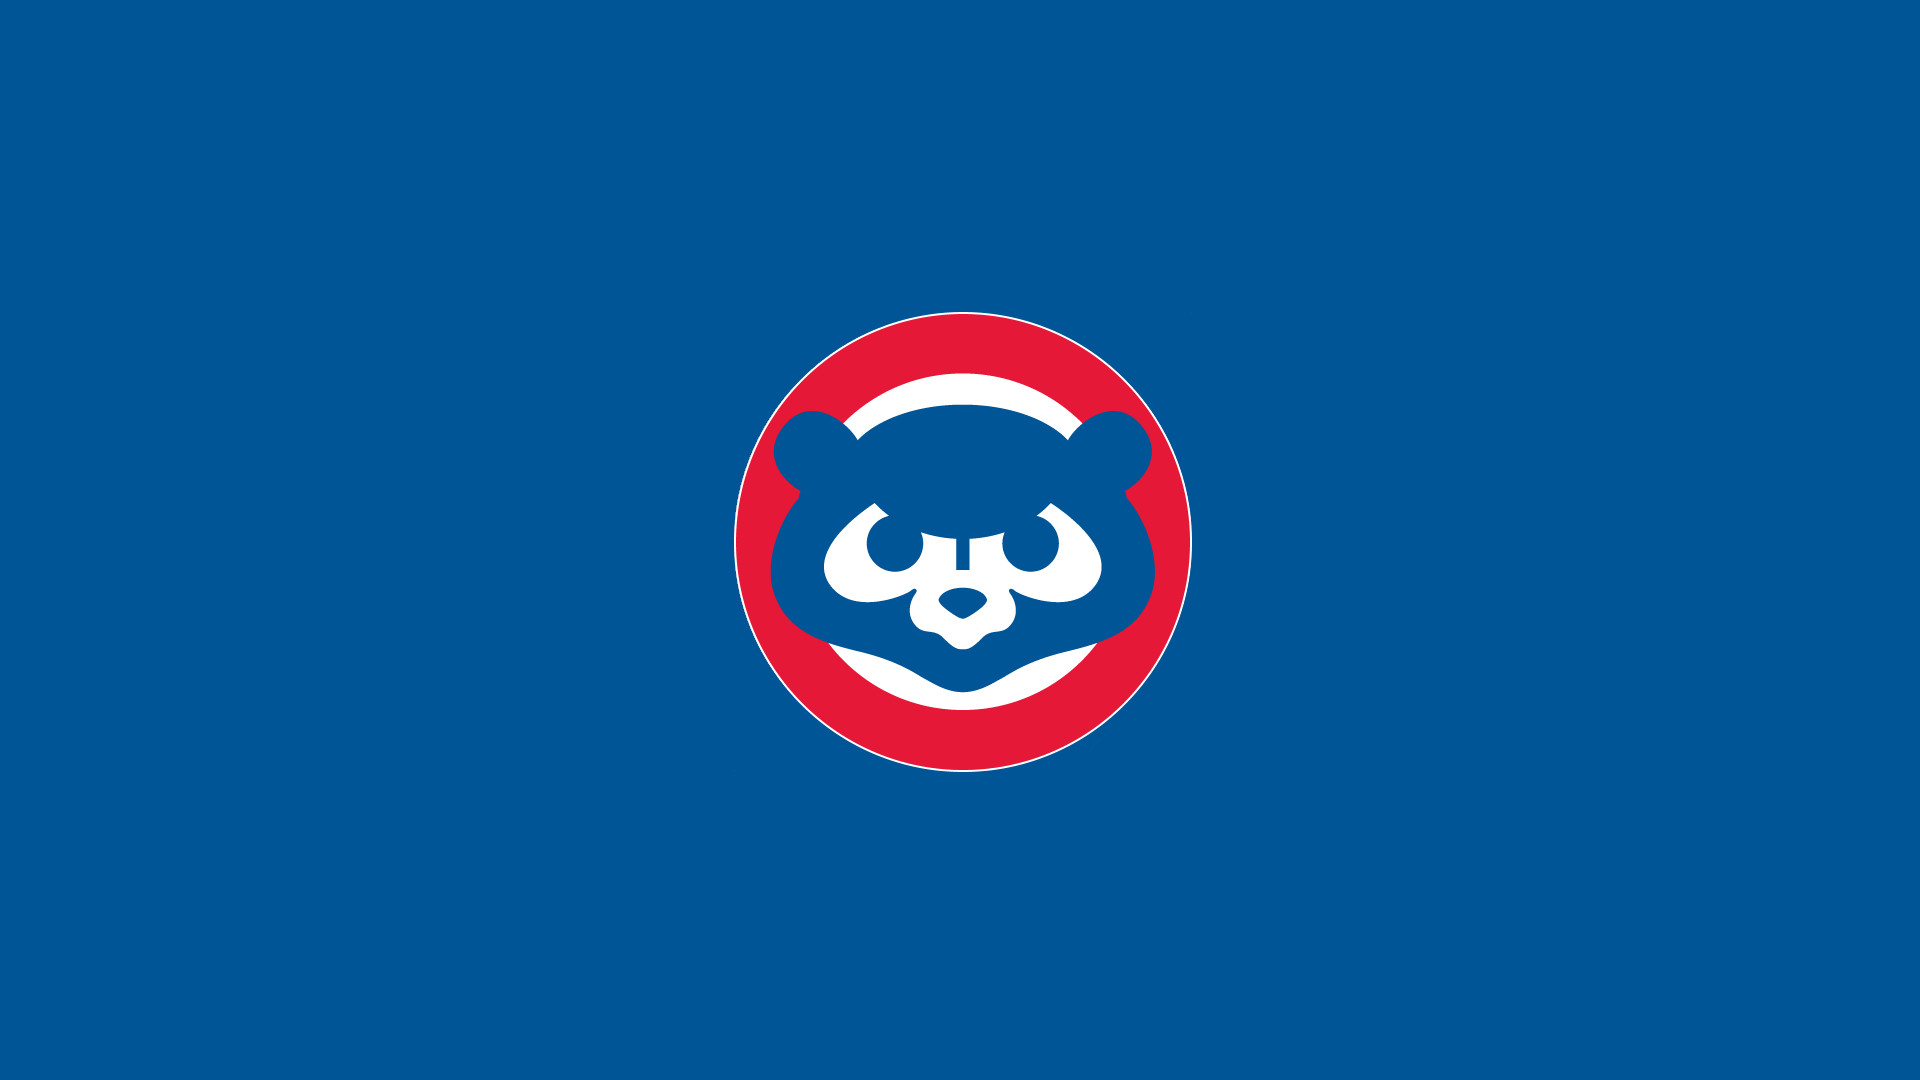 1920x1080 Chicago Cubs wallpapers | Chicago Cubs background - Page 3 | Cub .